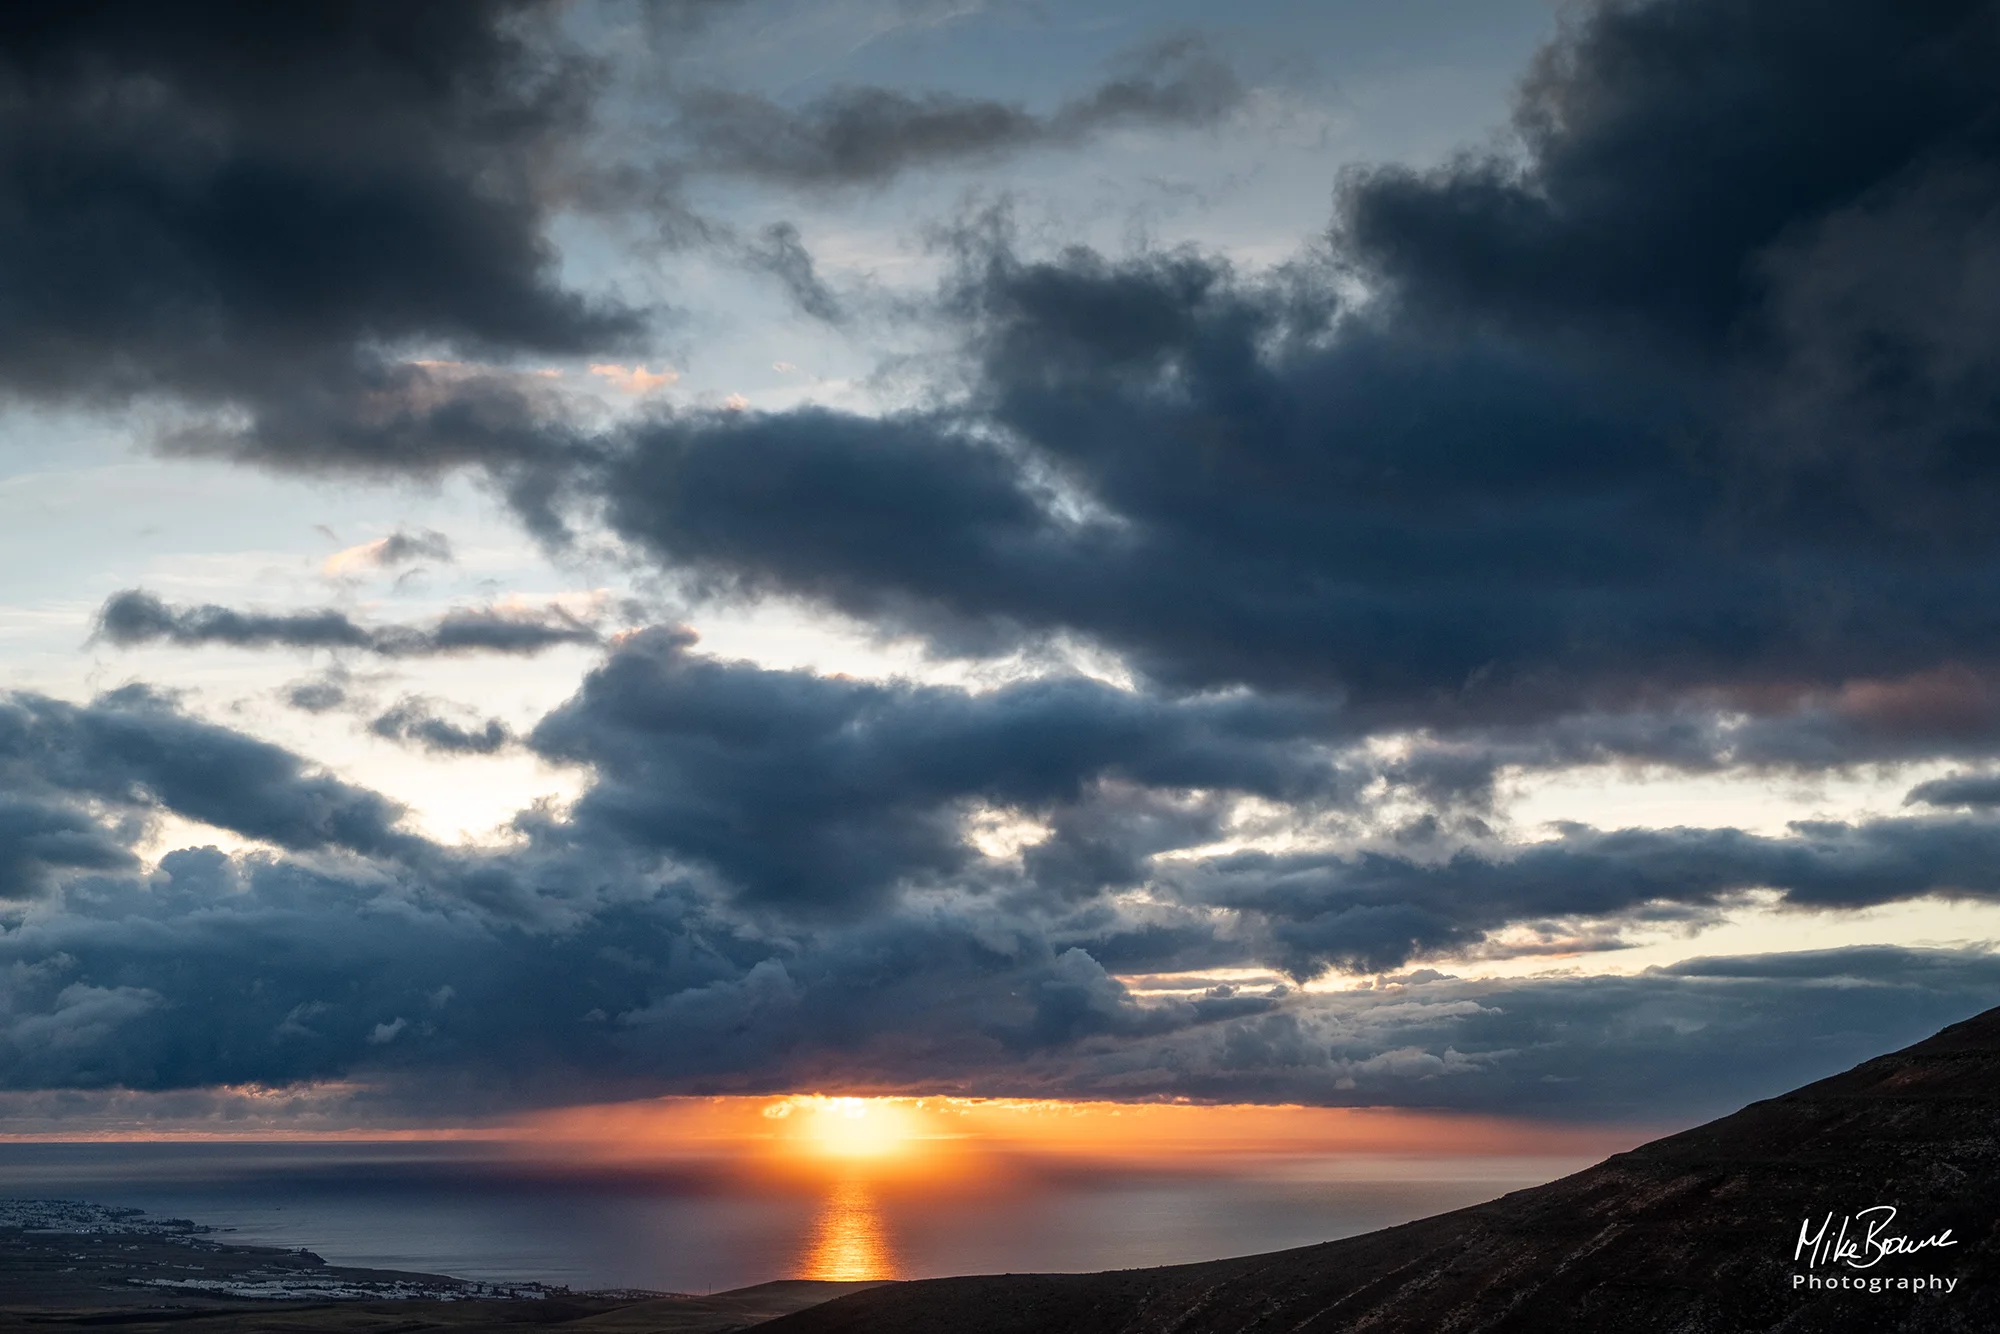 Sunrise and storm clouds over the sea off the coast of Playa Quemada, Lanzarote